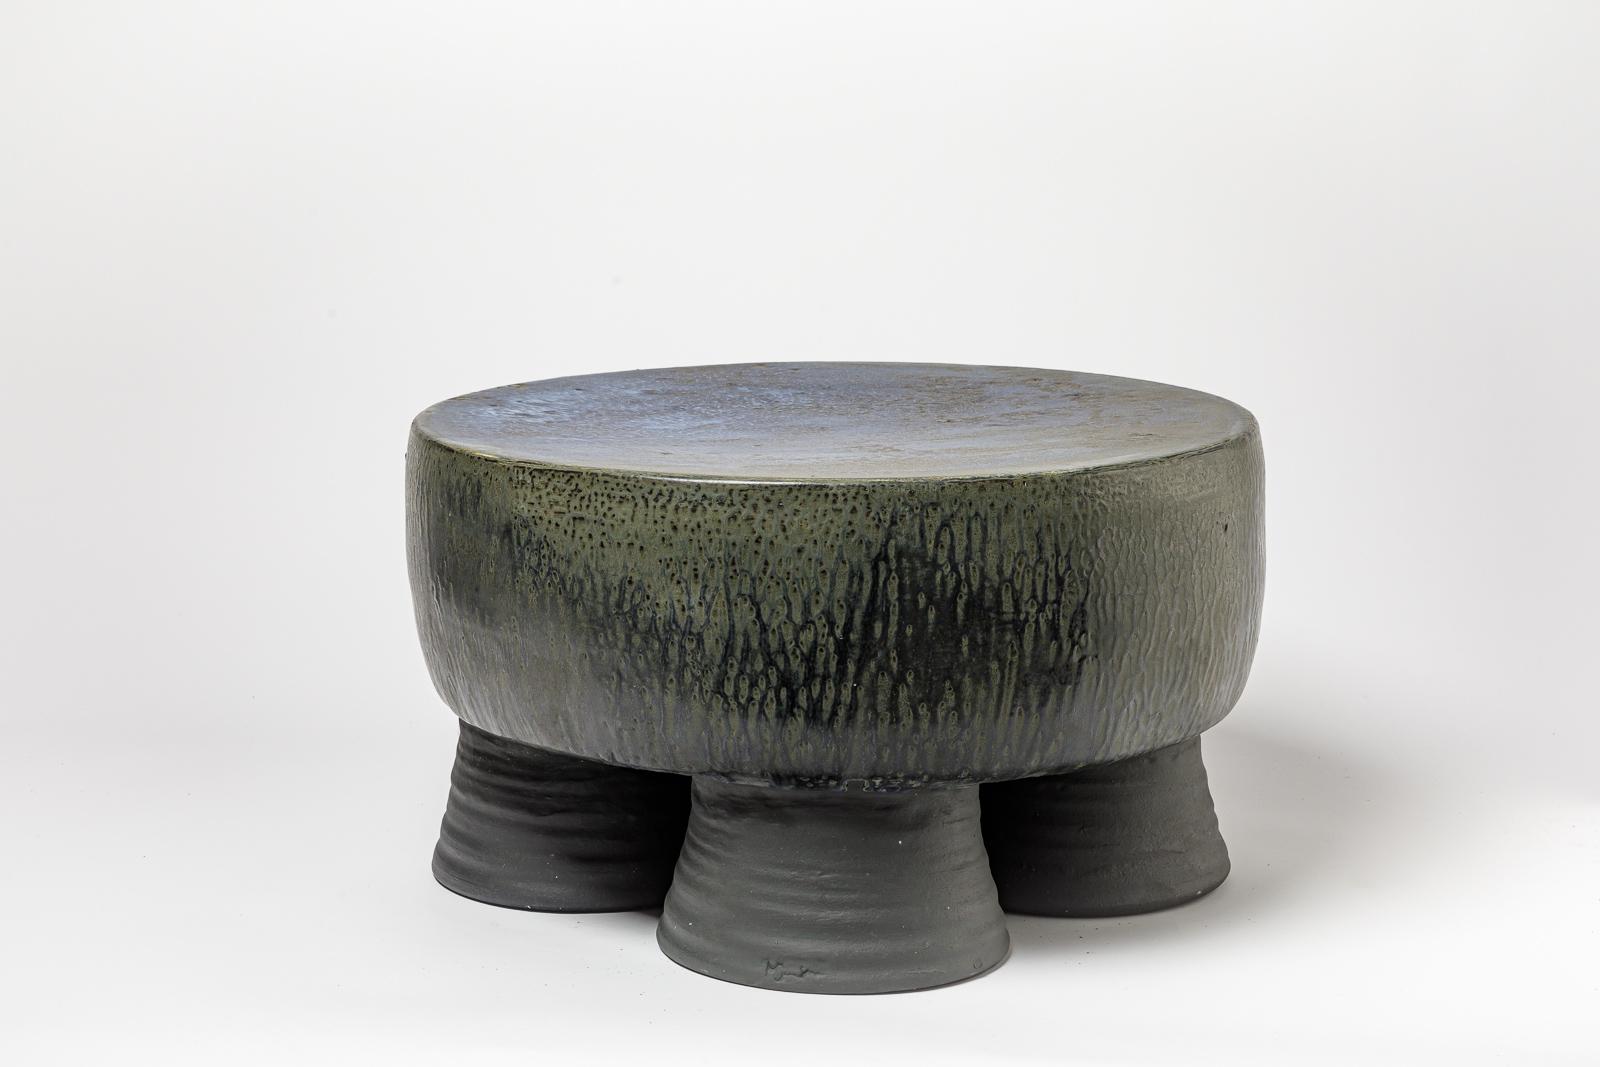 Beaux Arts Black/blue and grey/green glazed ceramic stool or coffee table by Mia Jensen.